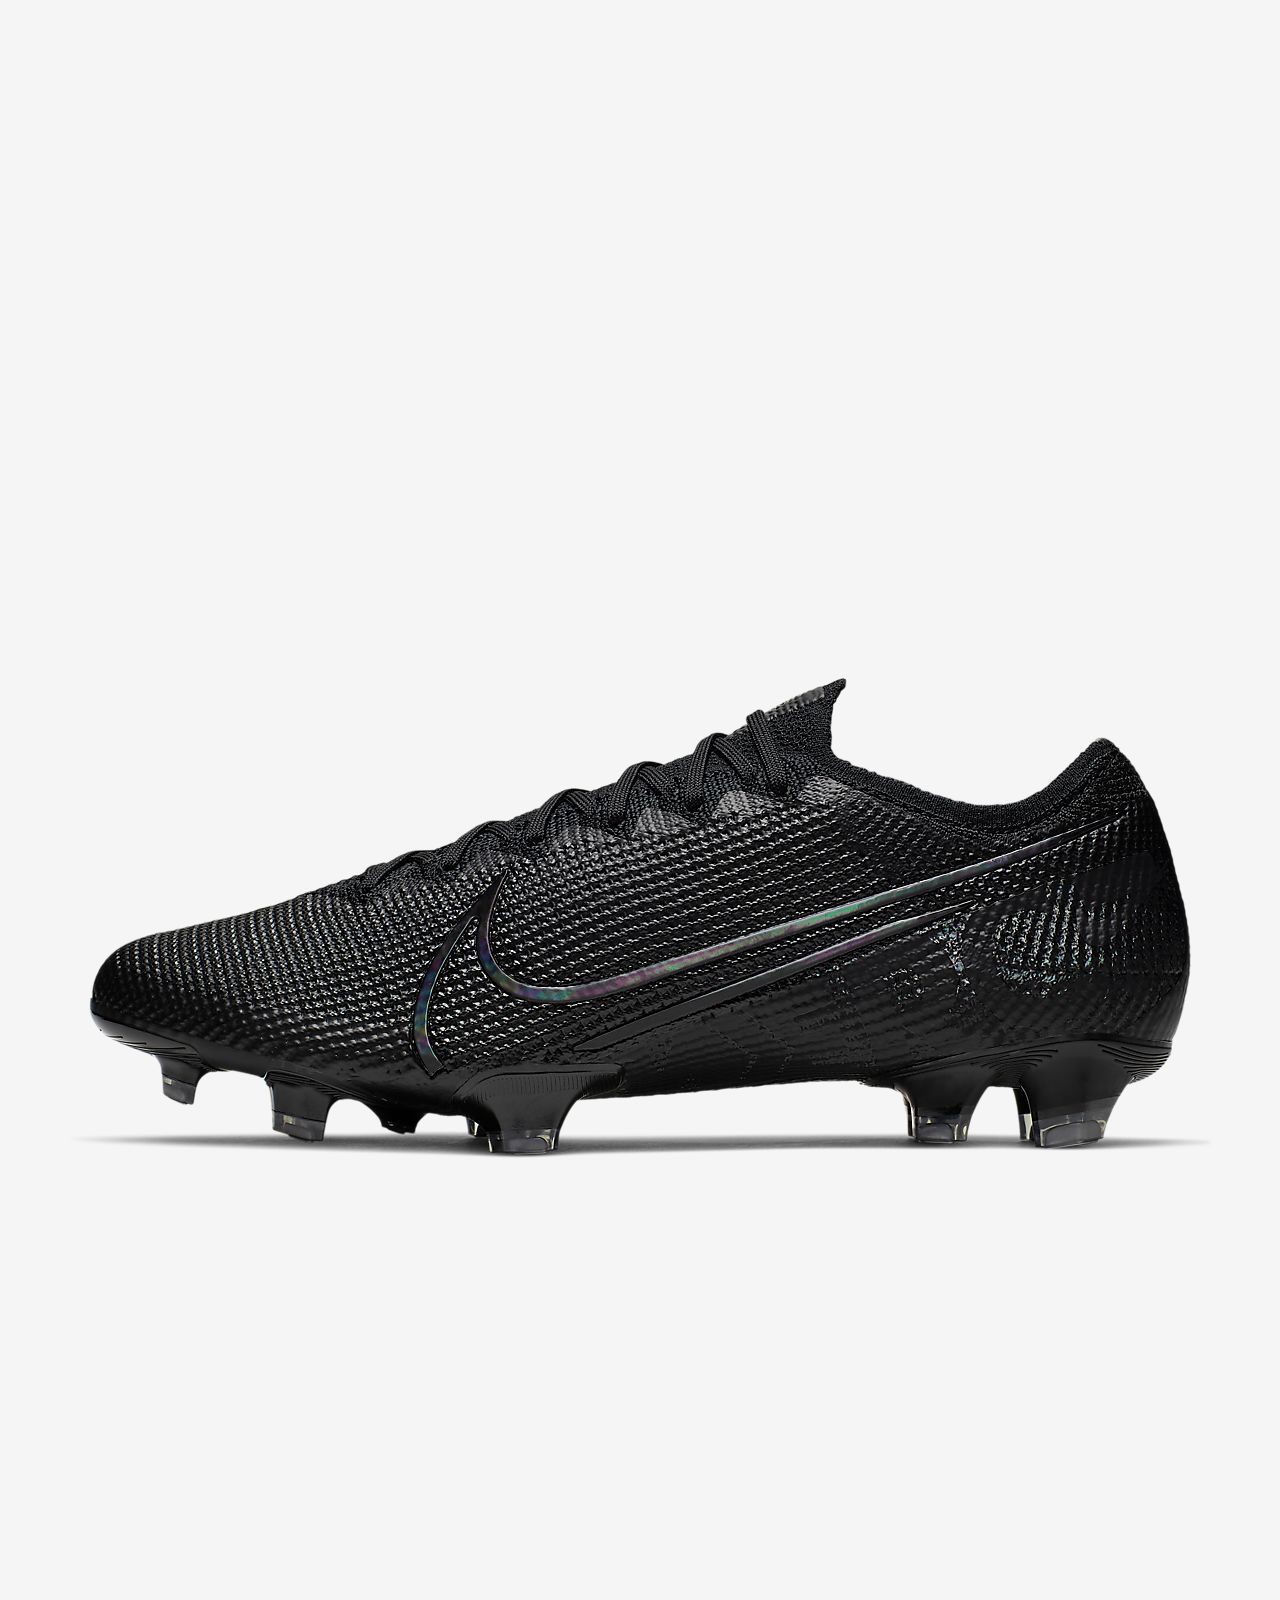 7 Reasons to/NOT to Buy Nike Mercurial Vapor XII Academy